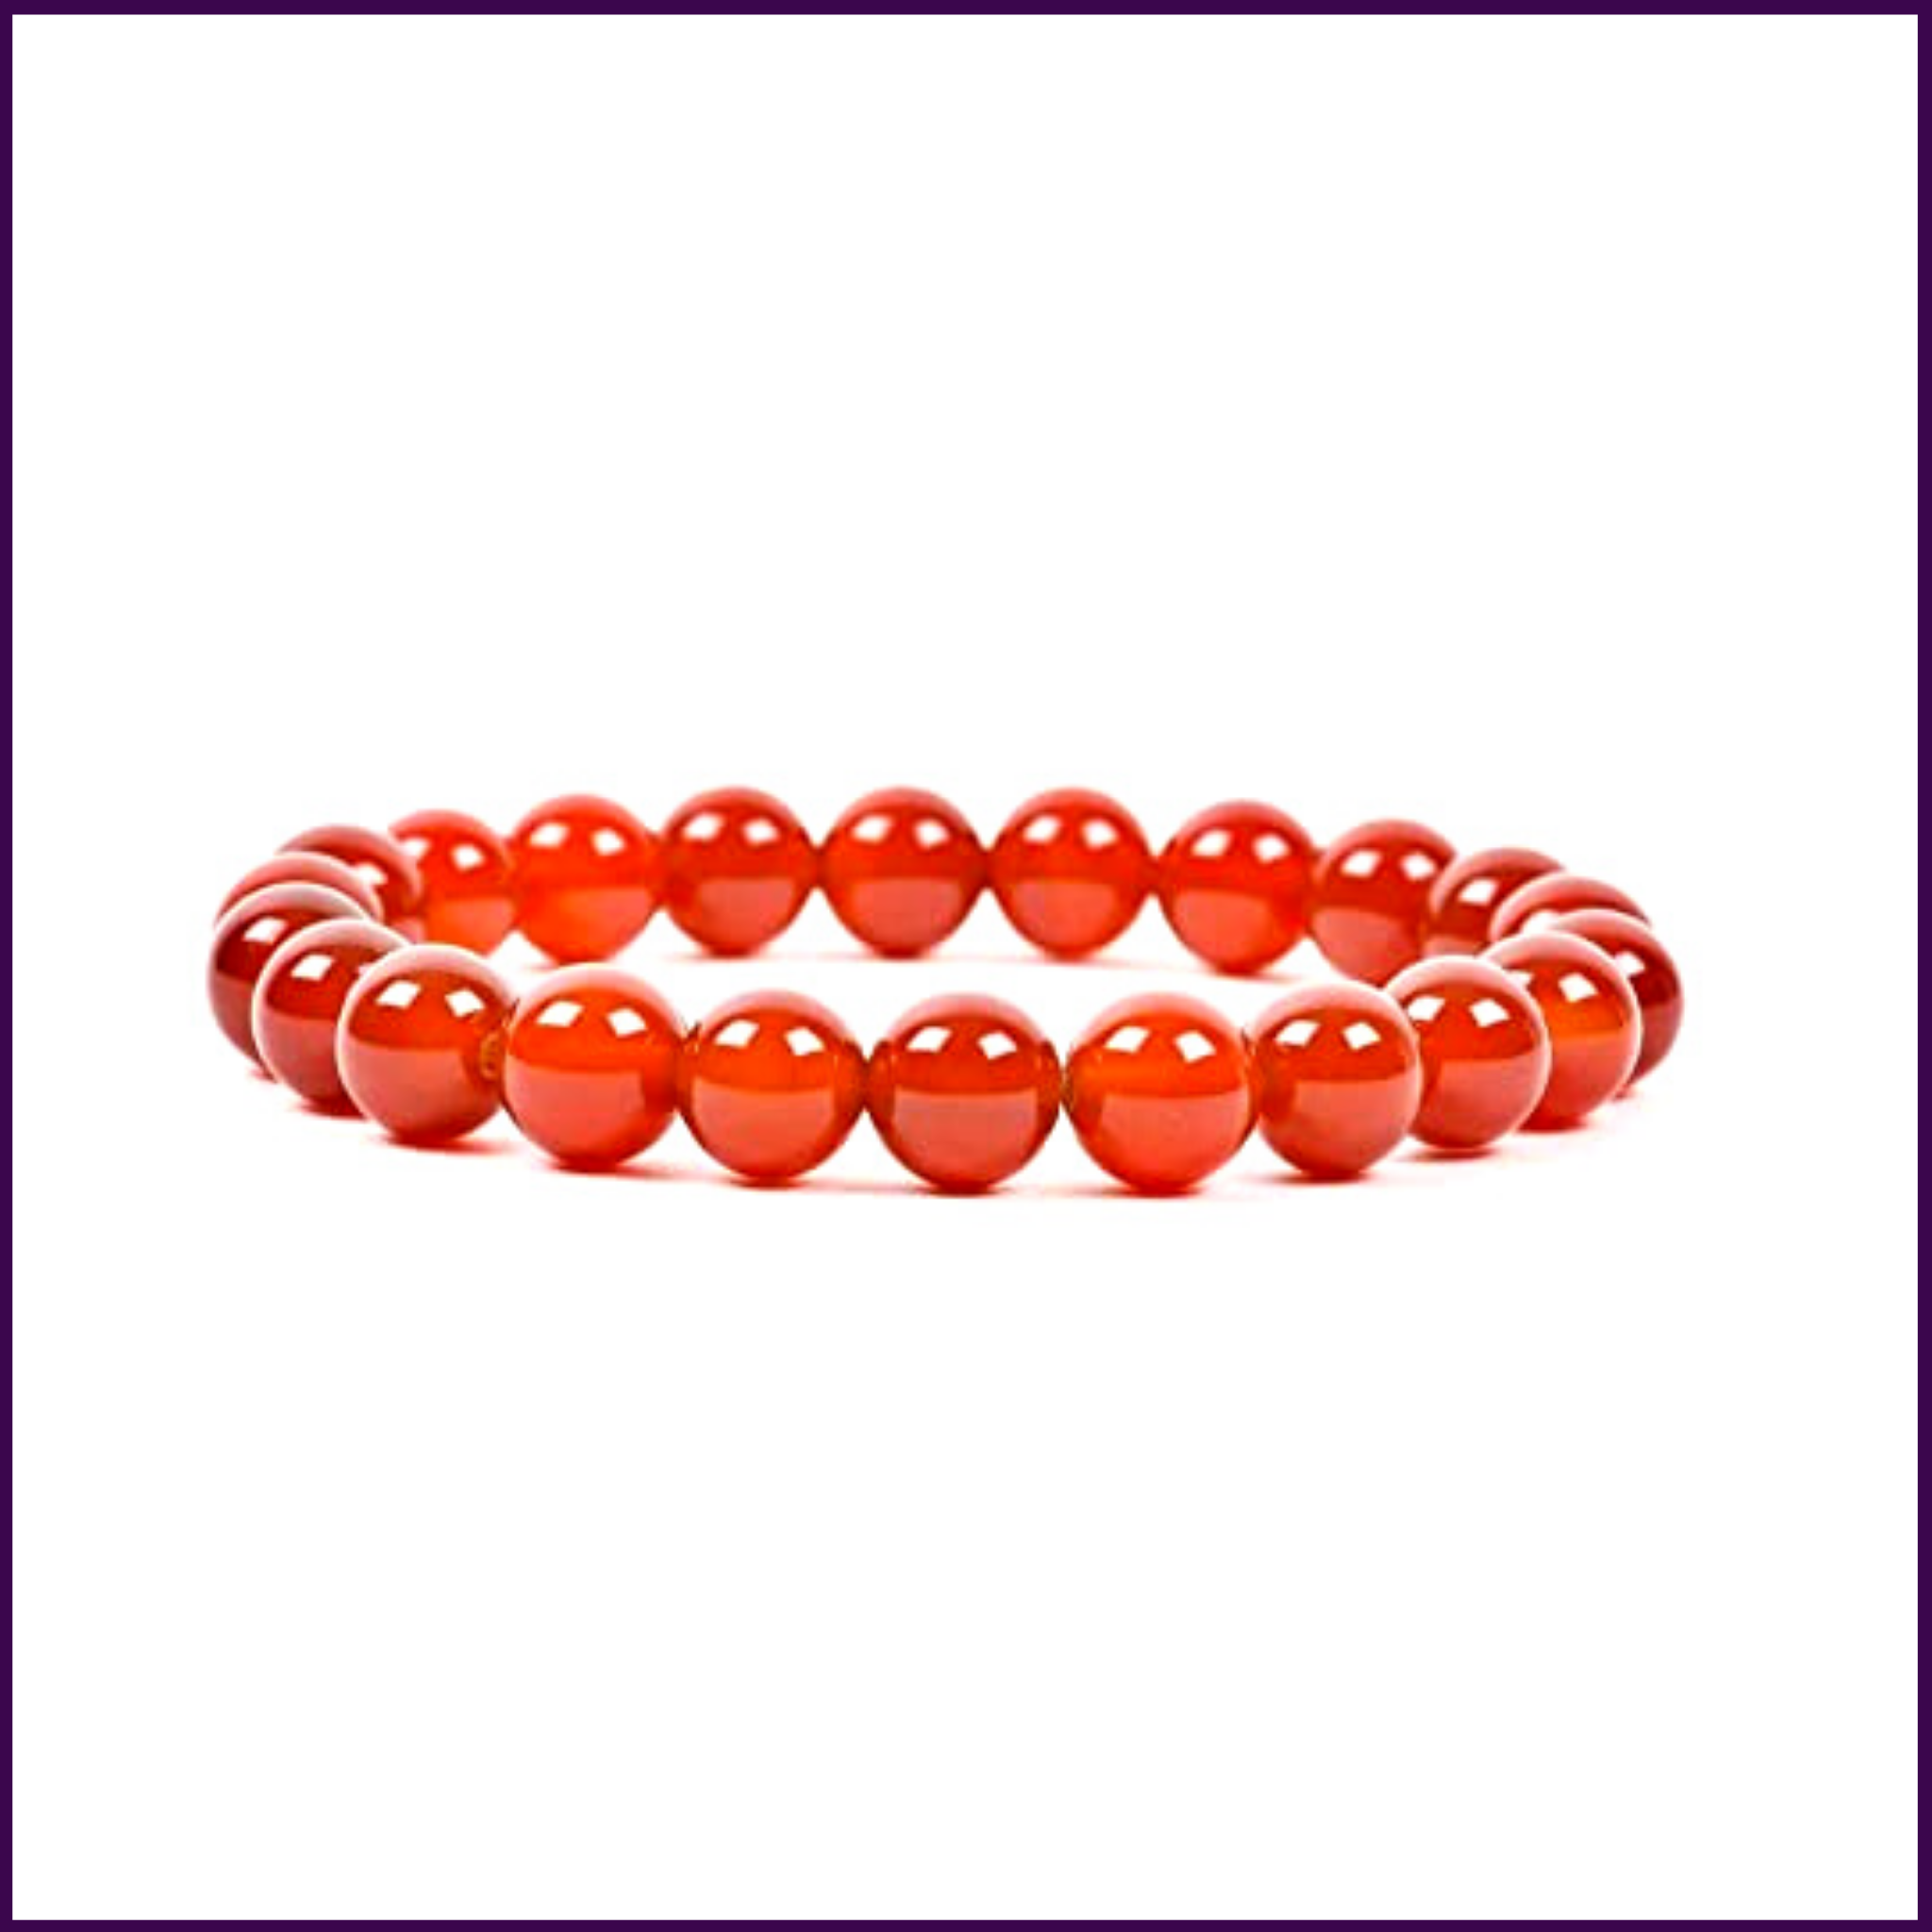 Red Carnelian Bracelet Crystal For Facing Difficult Situations in Life - 51pyramids